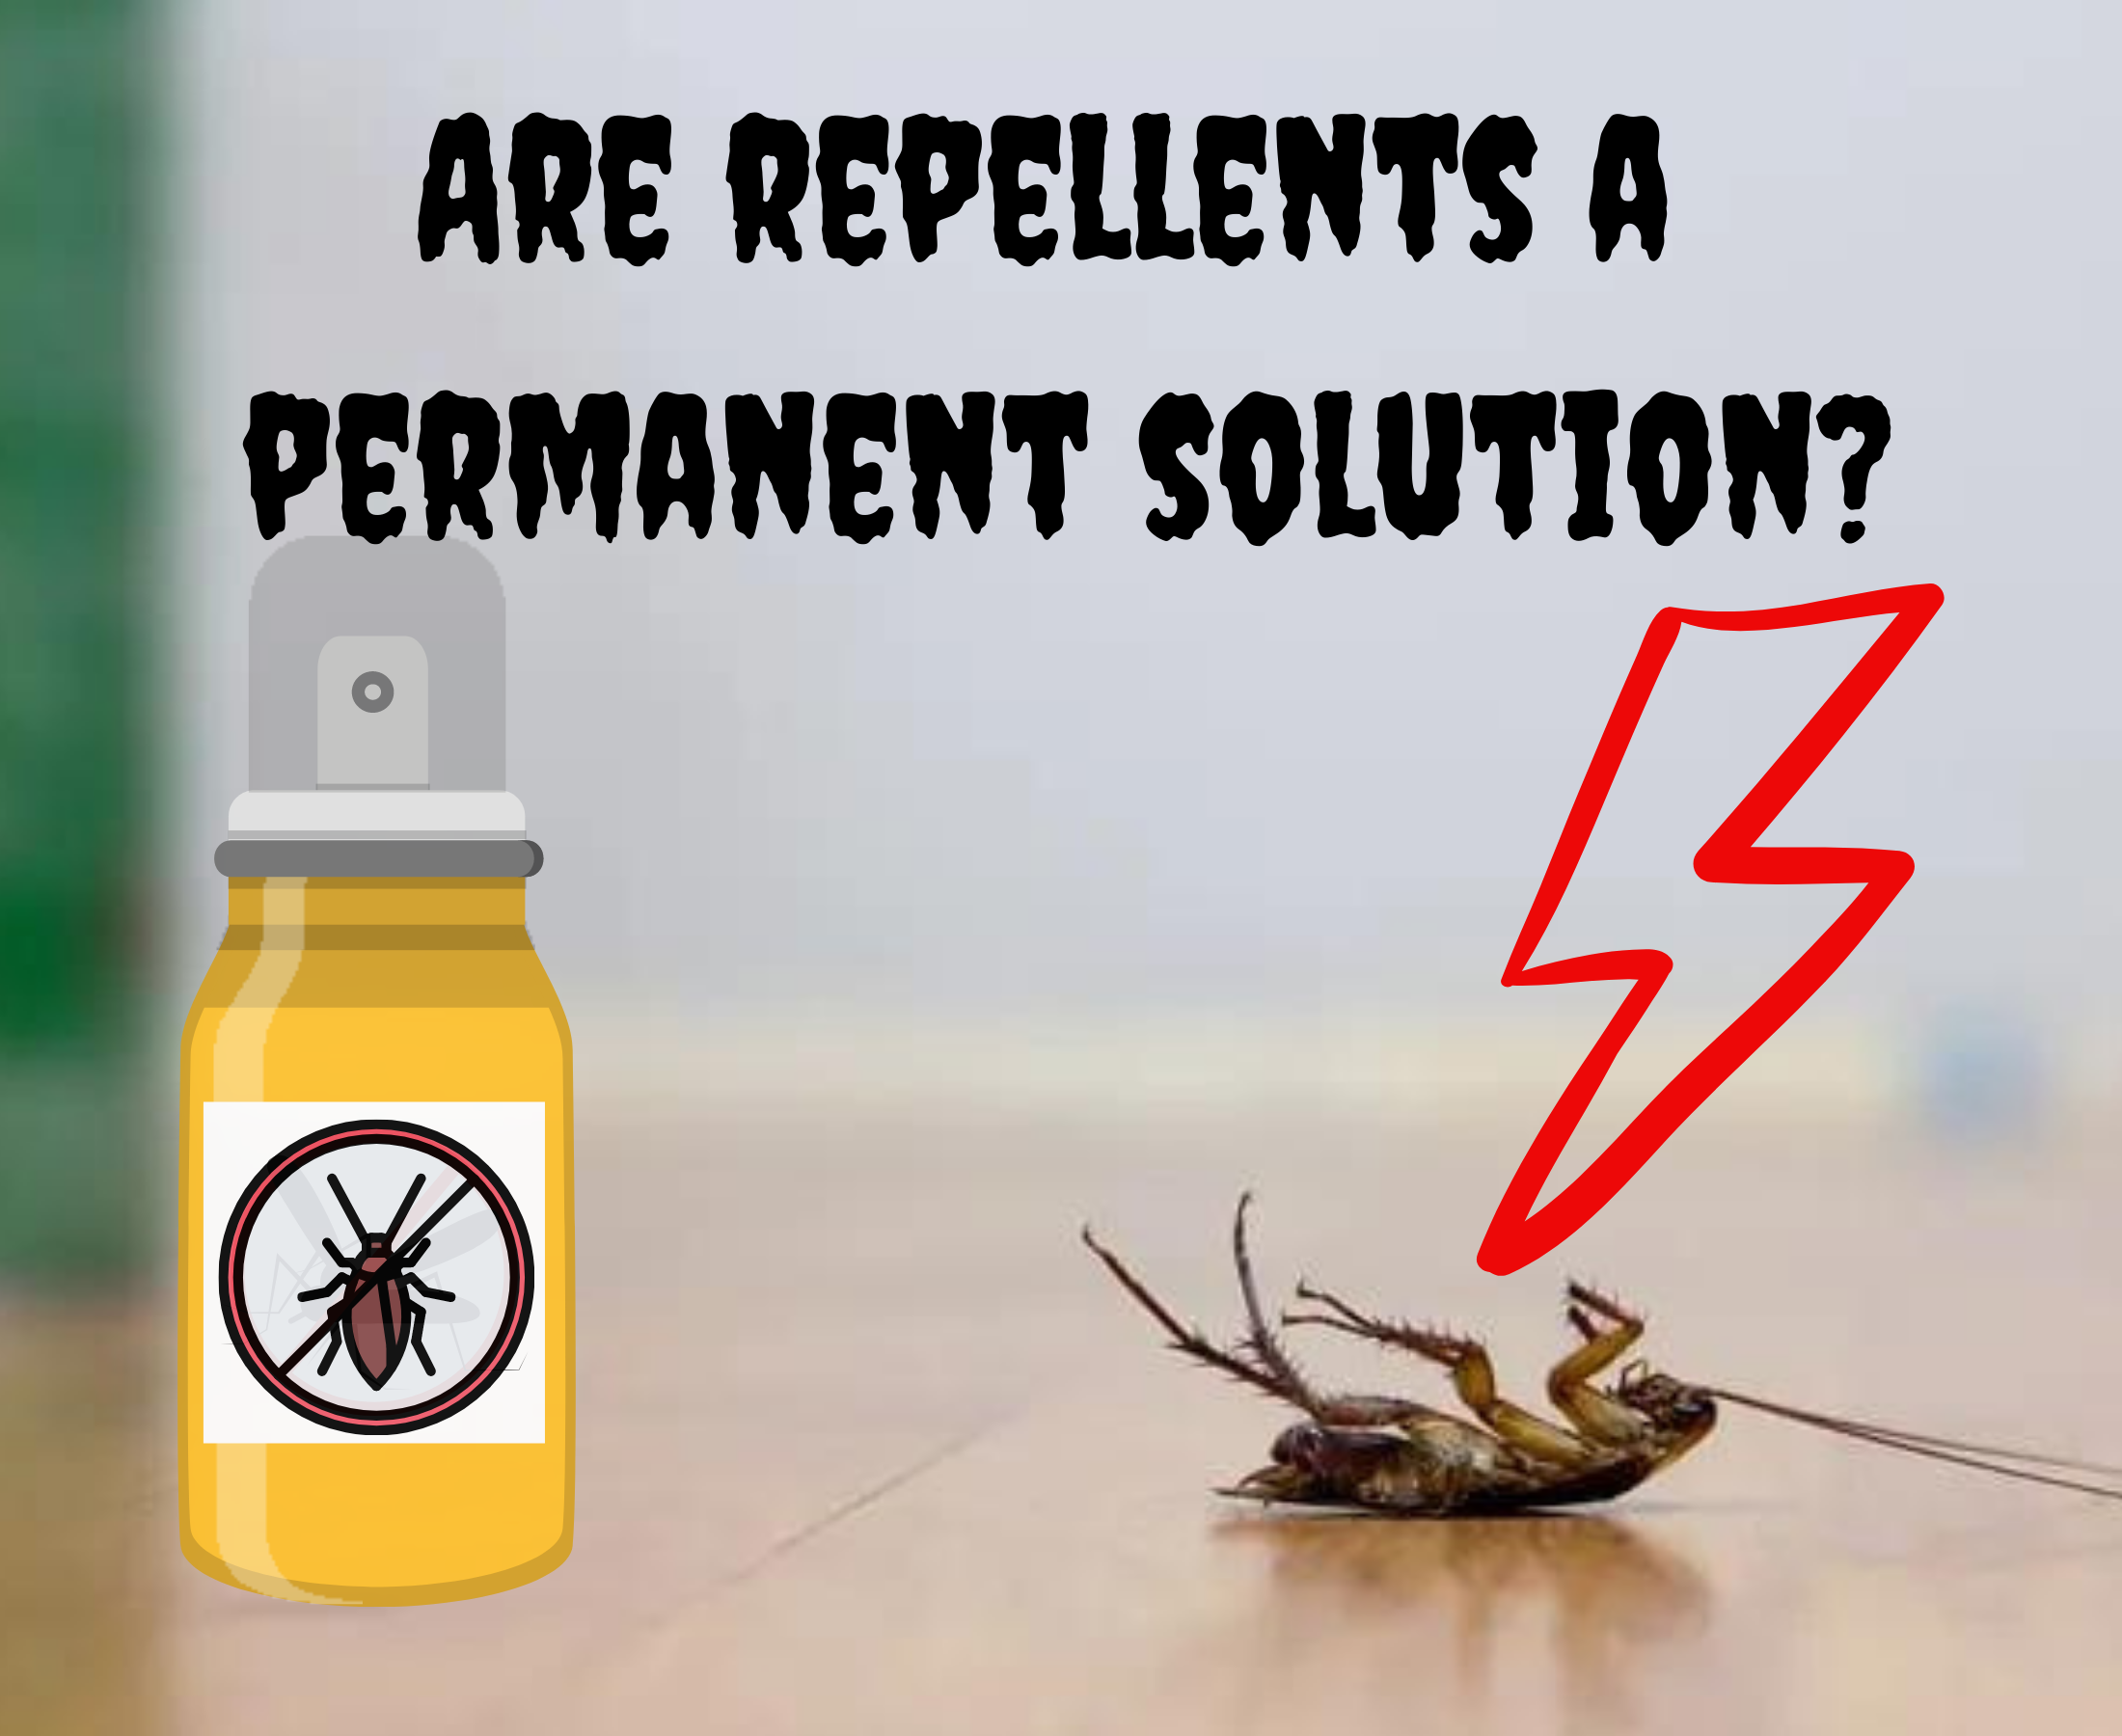 Can repellent opt as a sole method for insects?